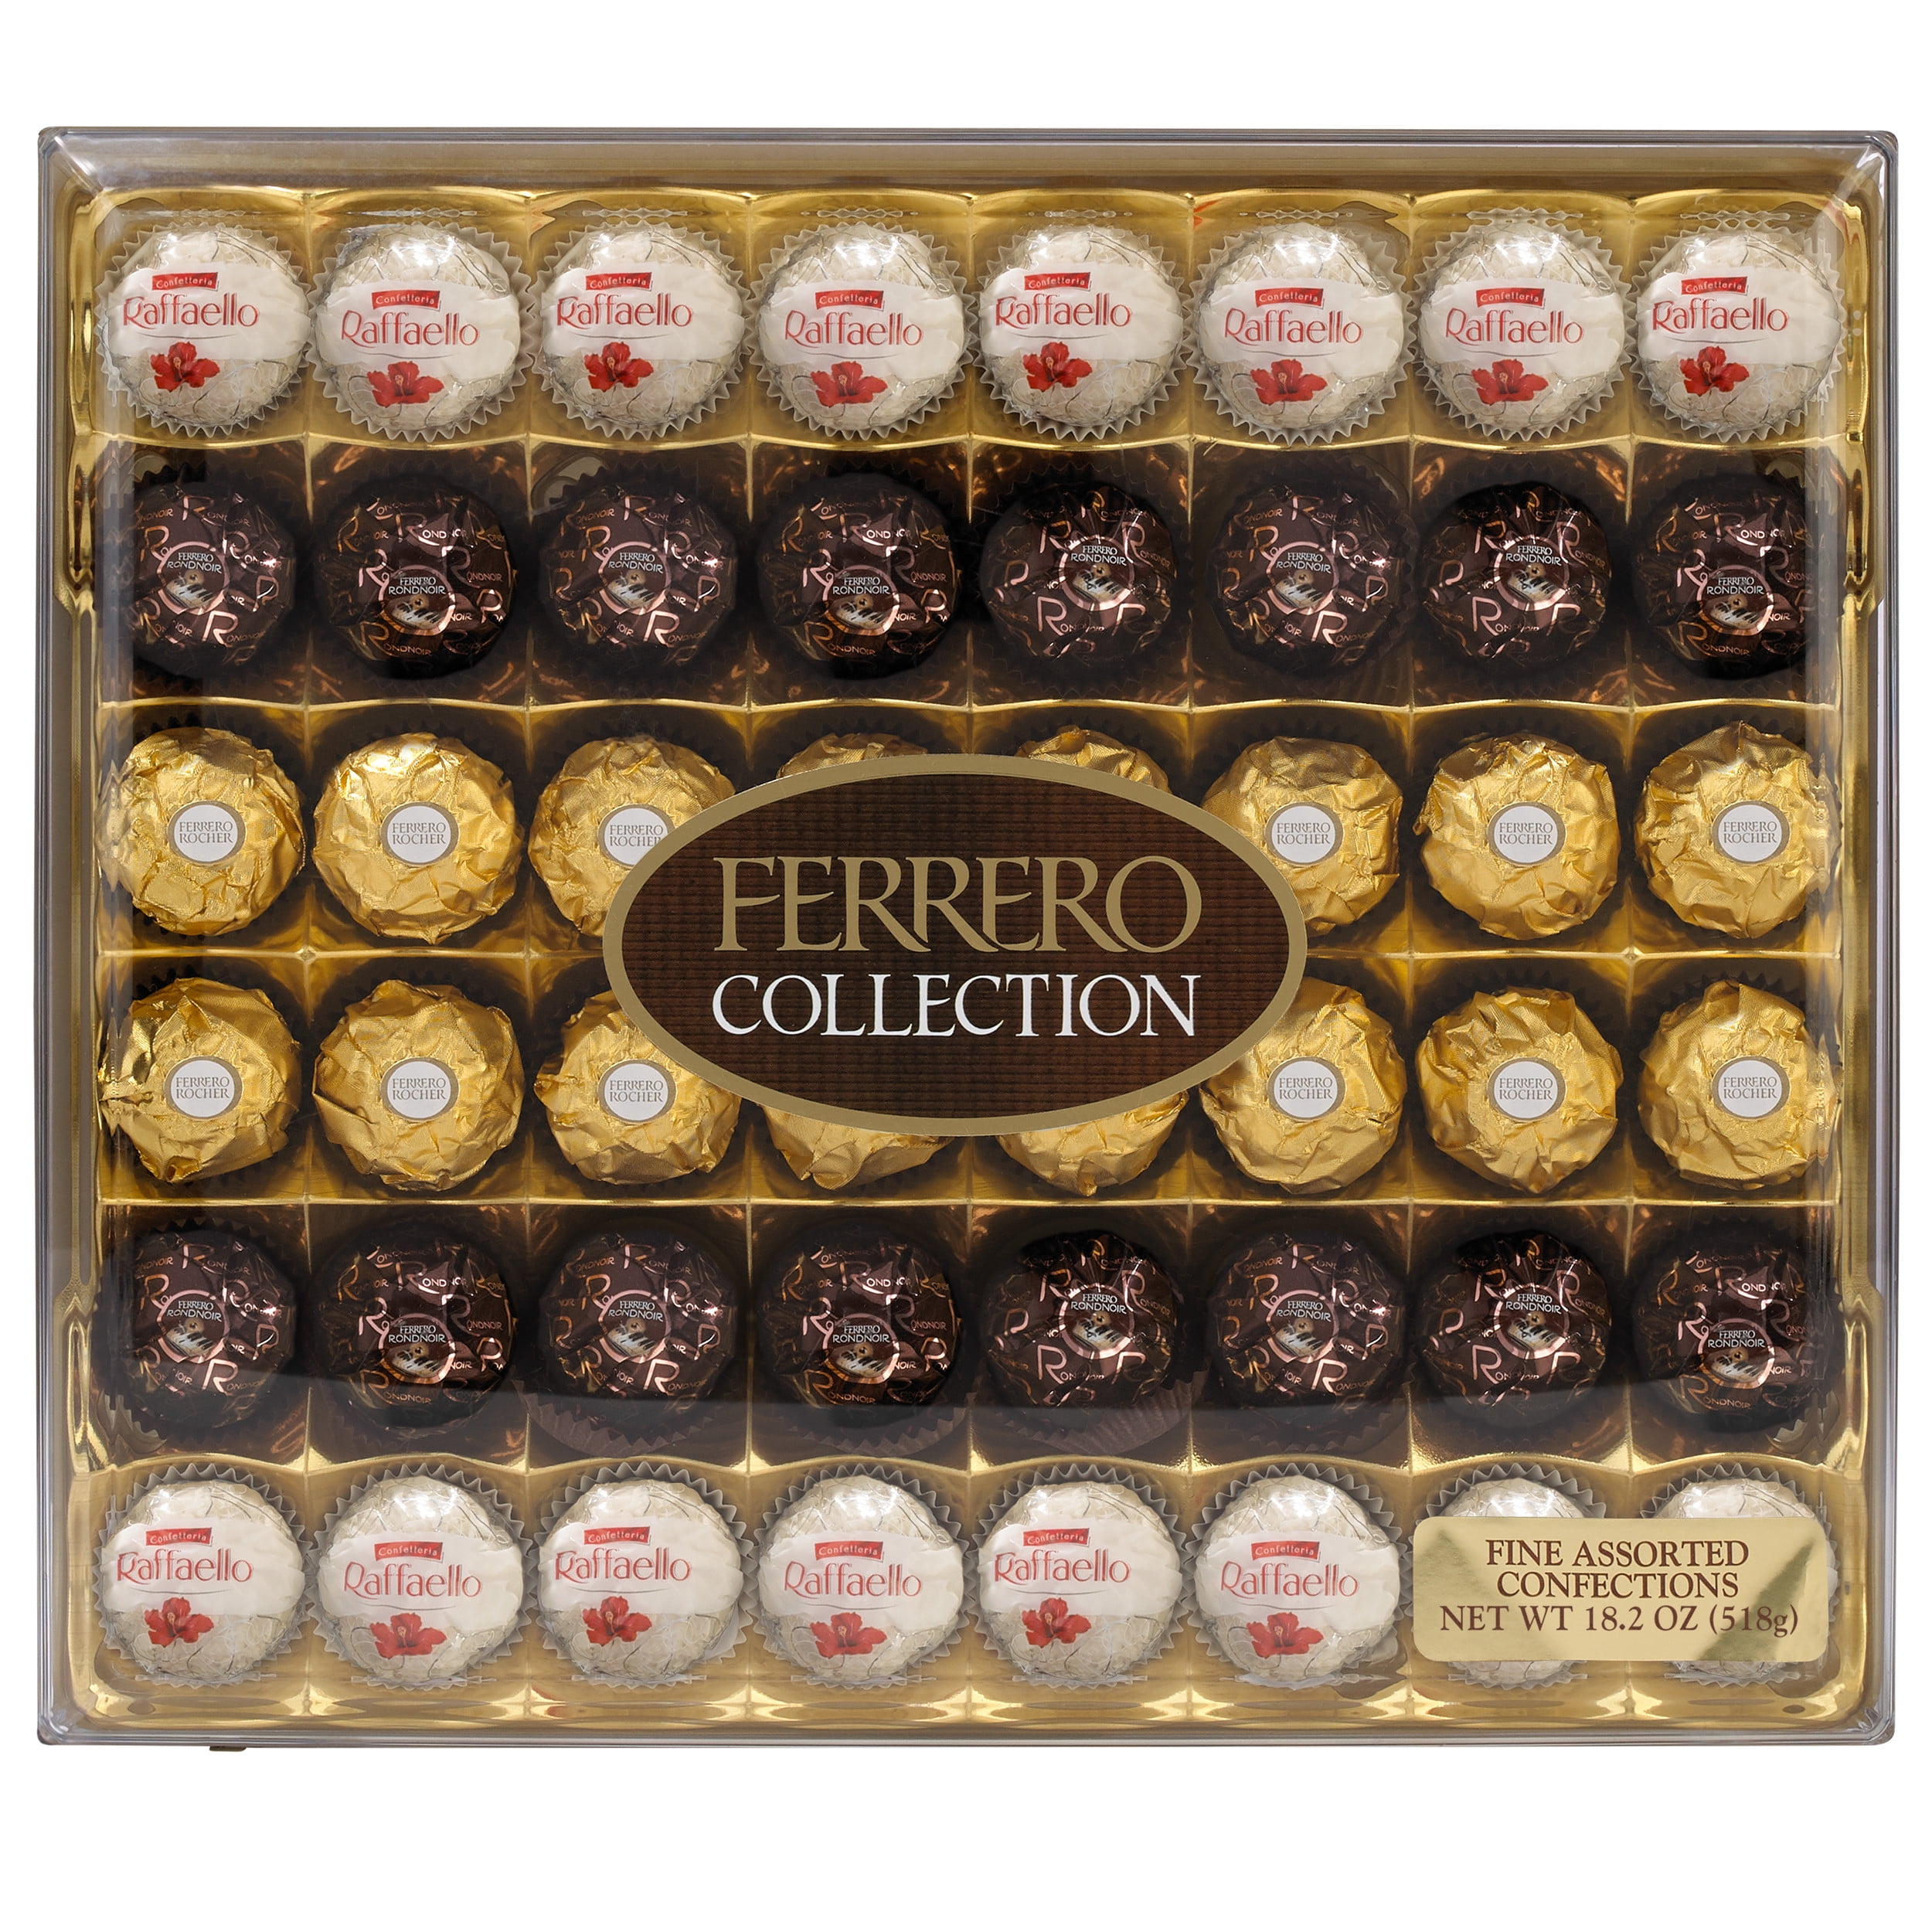 48 Count) Ferrero Collection Premium Gourmet Assorted Hazelnut Milk  Chocolate, Dark Chocolate and Coconut, A Great Easter Gift, 18.2 oz